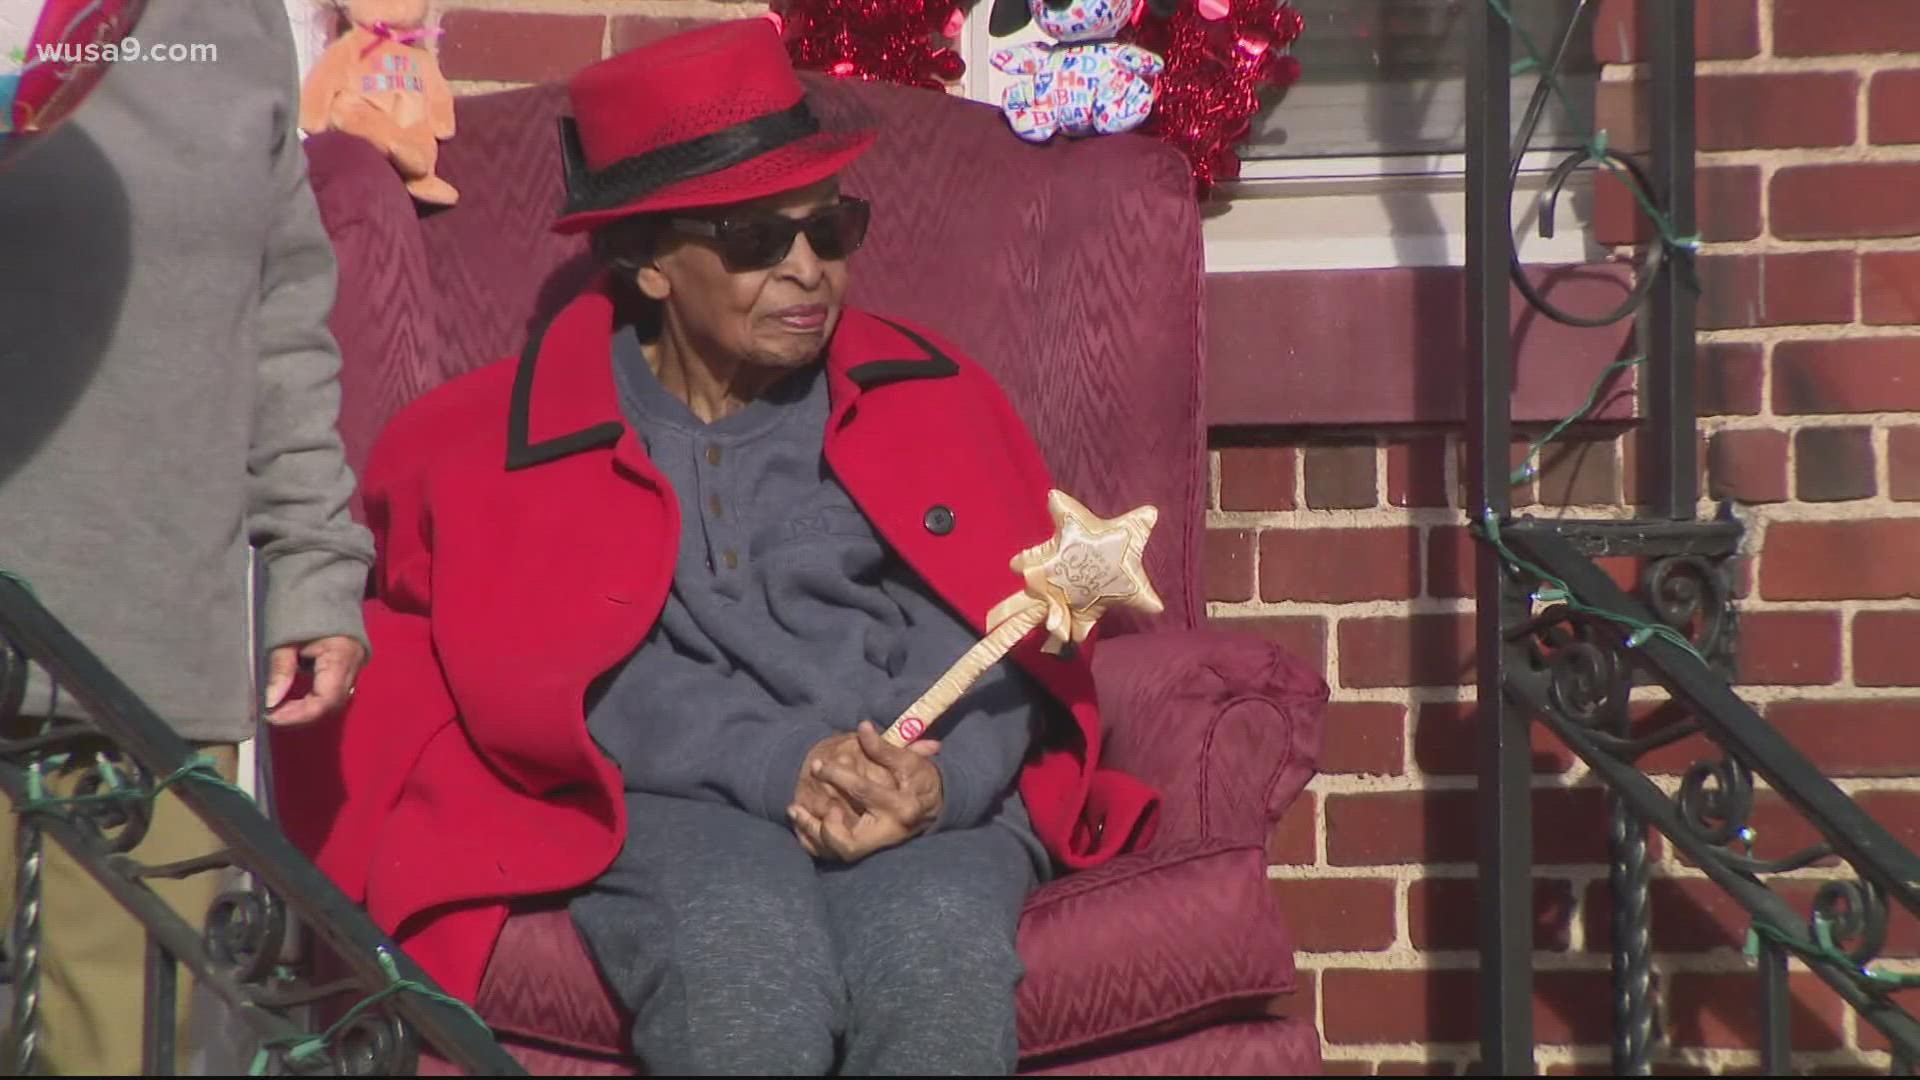 Evelyn Ford was honored by her community in Northeast DC over the weekend.